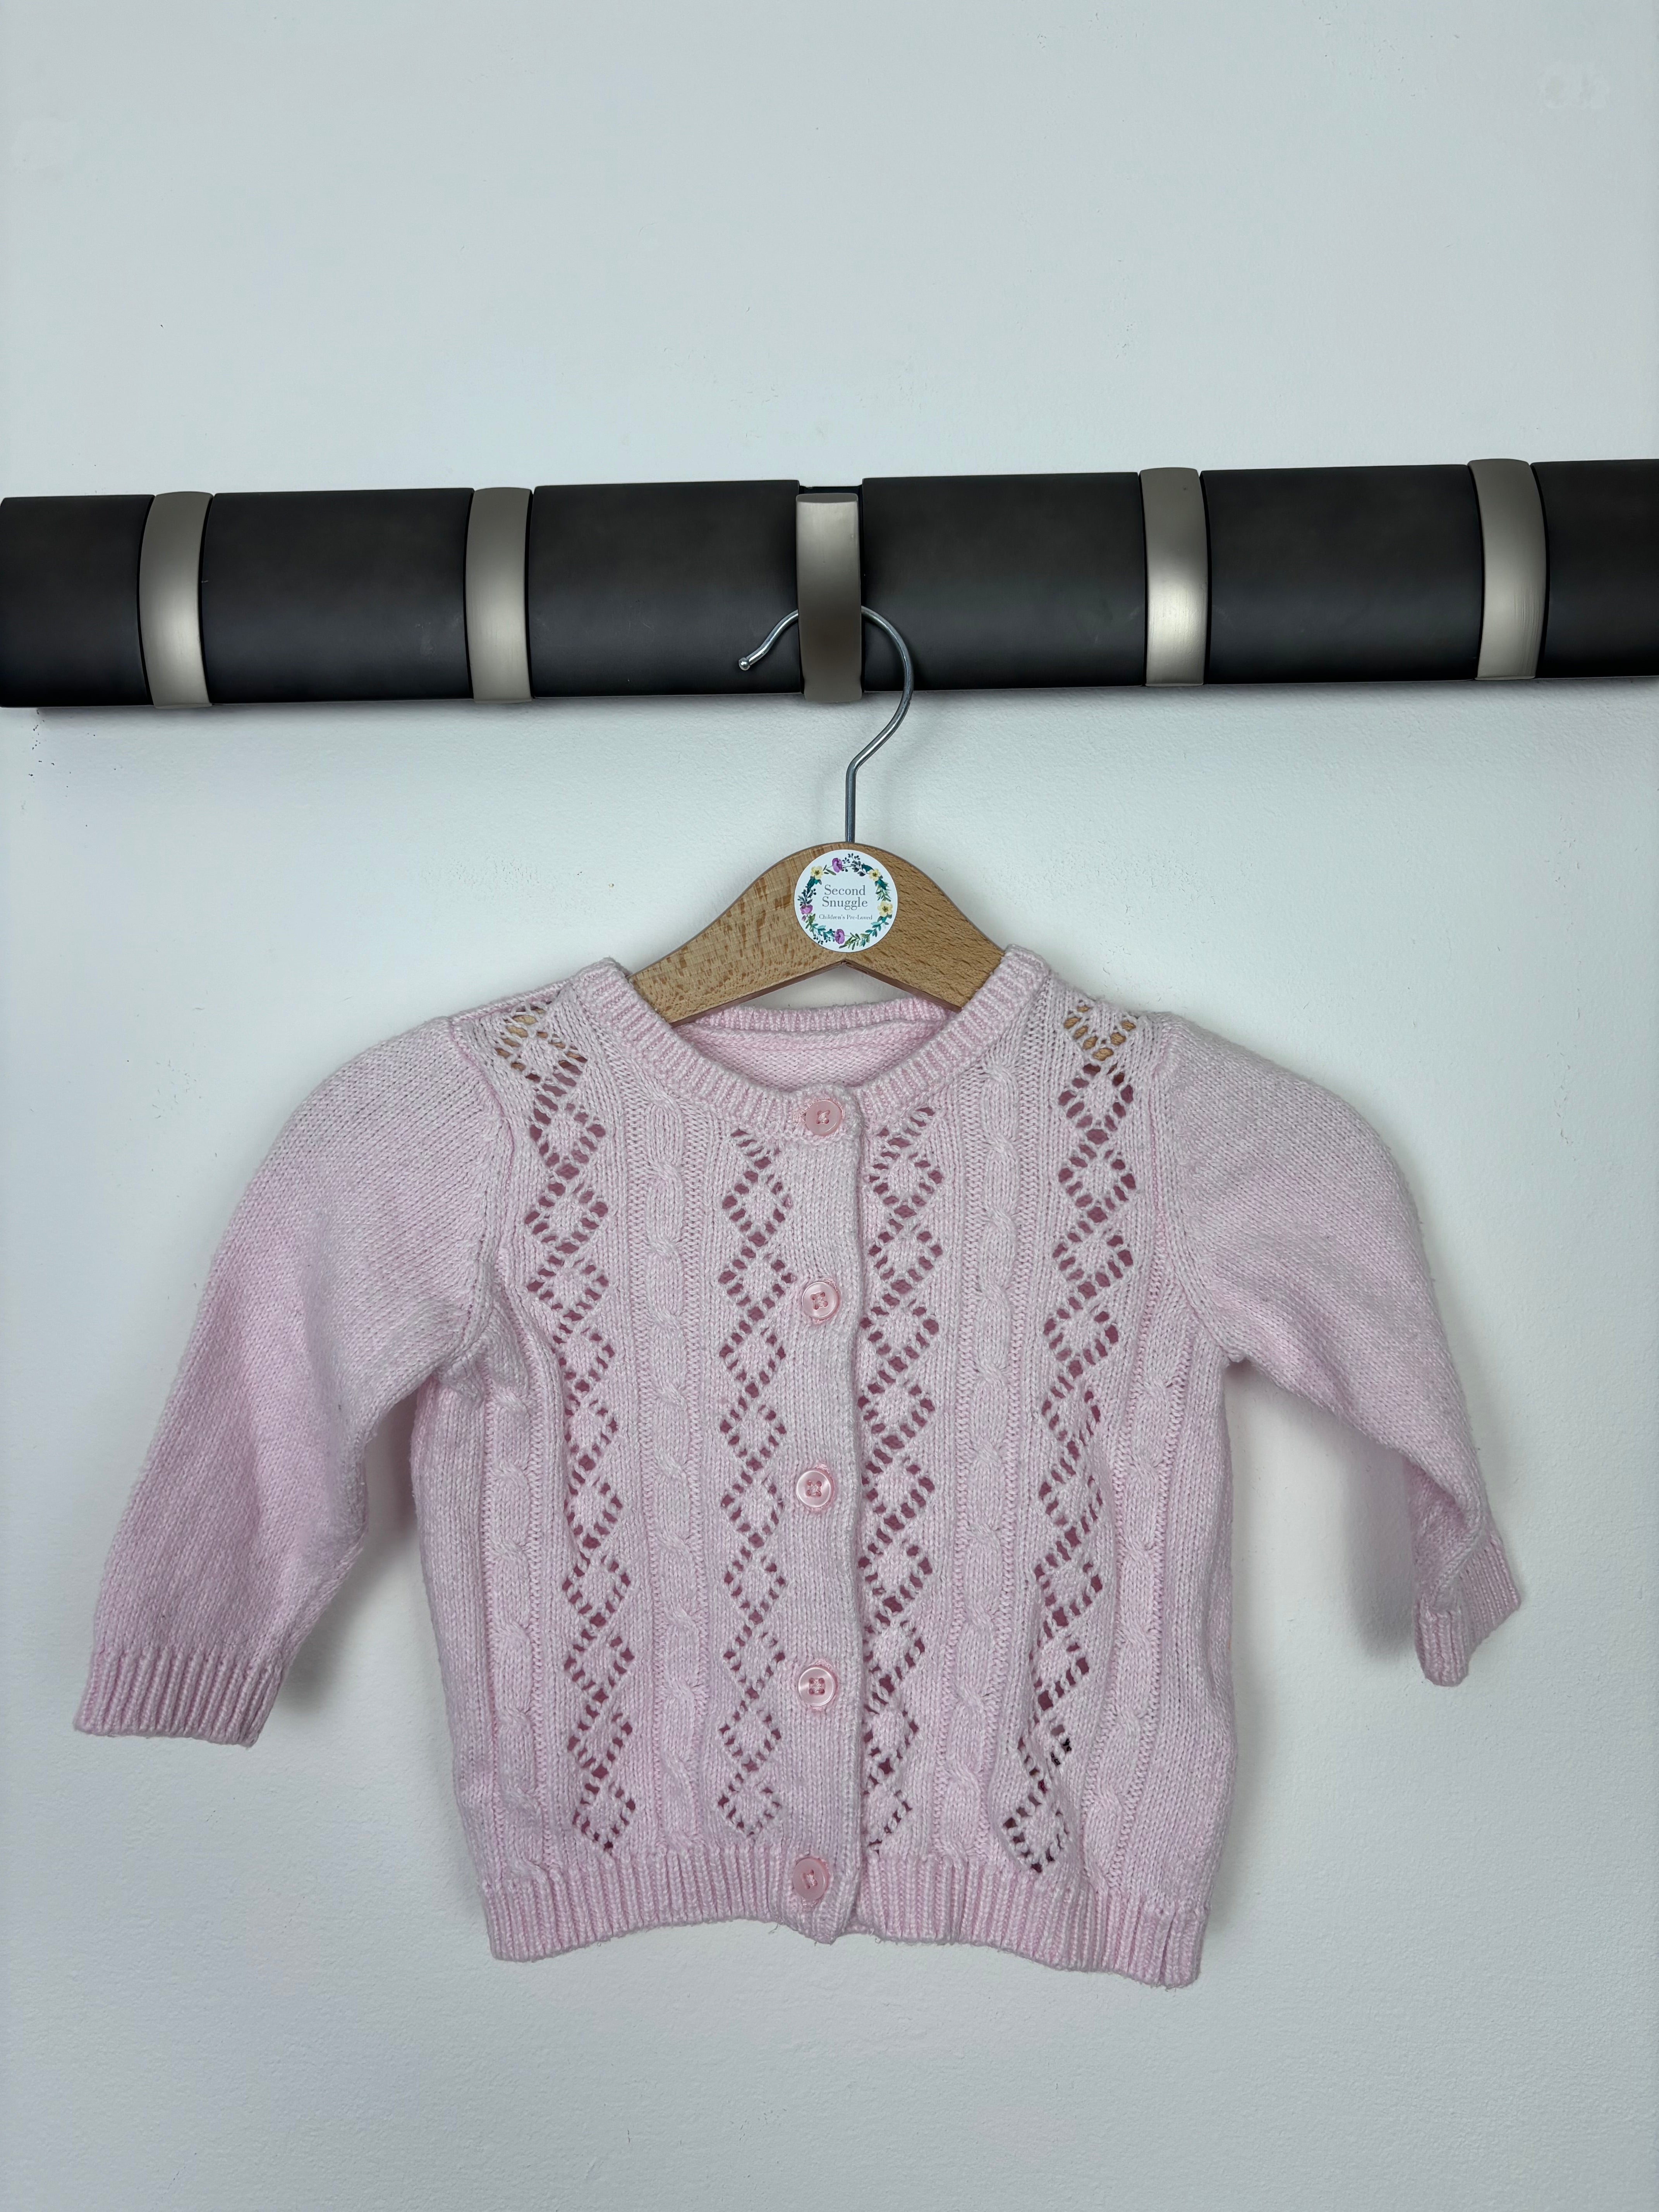 M&S 0-3 Months-Cardigans-Second Snuggle Preloved